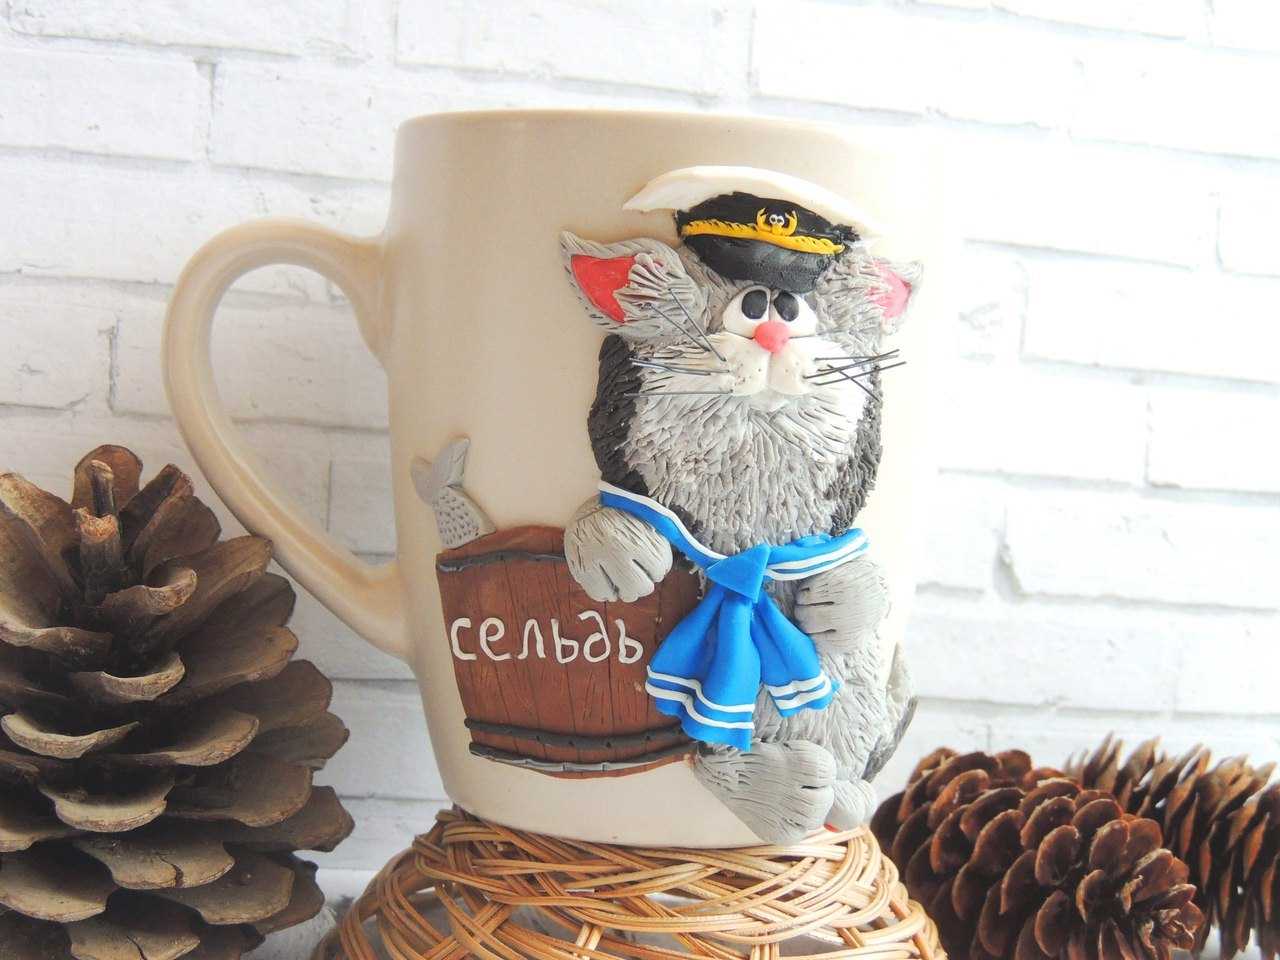 unusual decoration of the mug with polymer clay animals at home